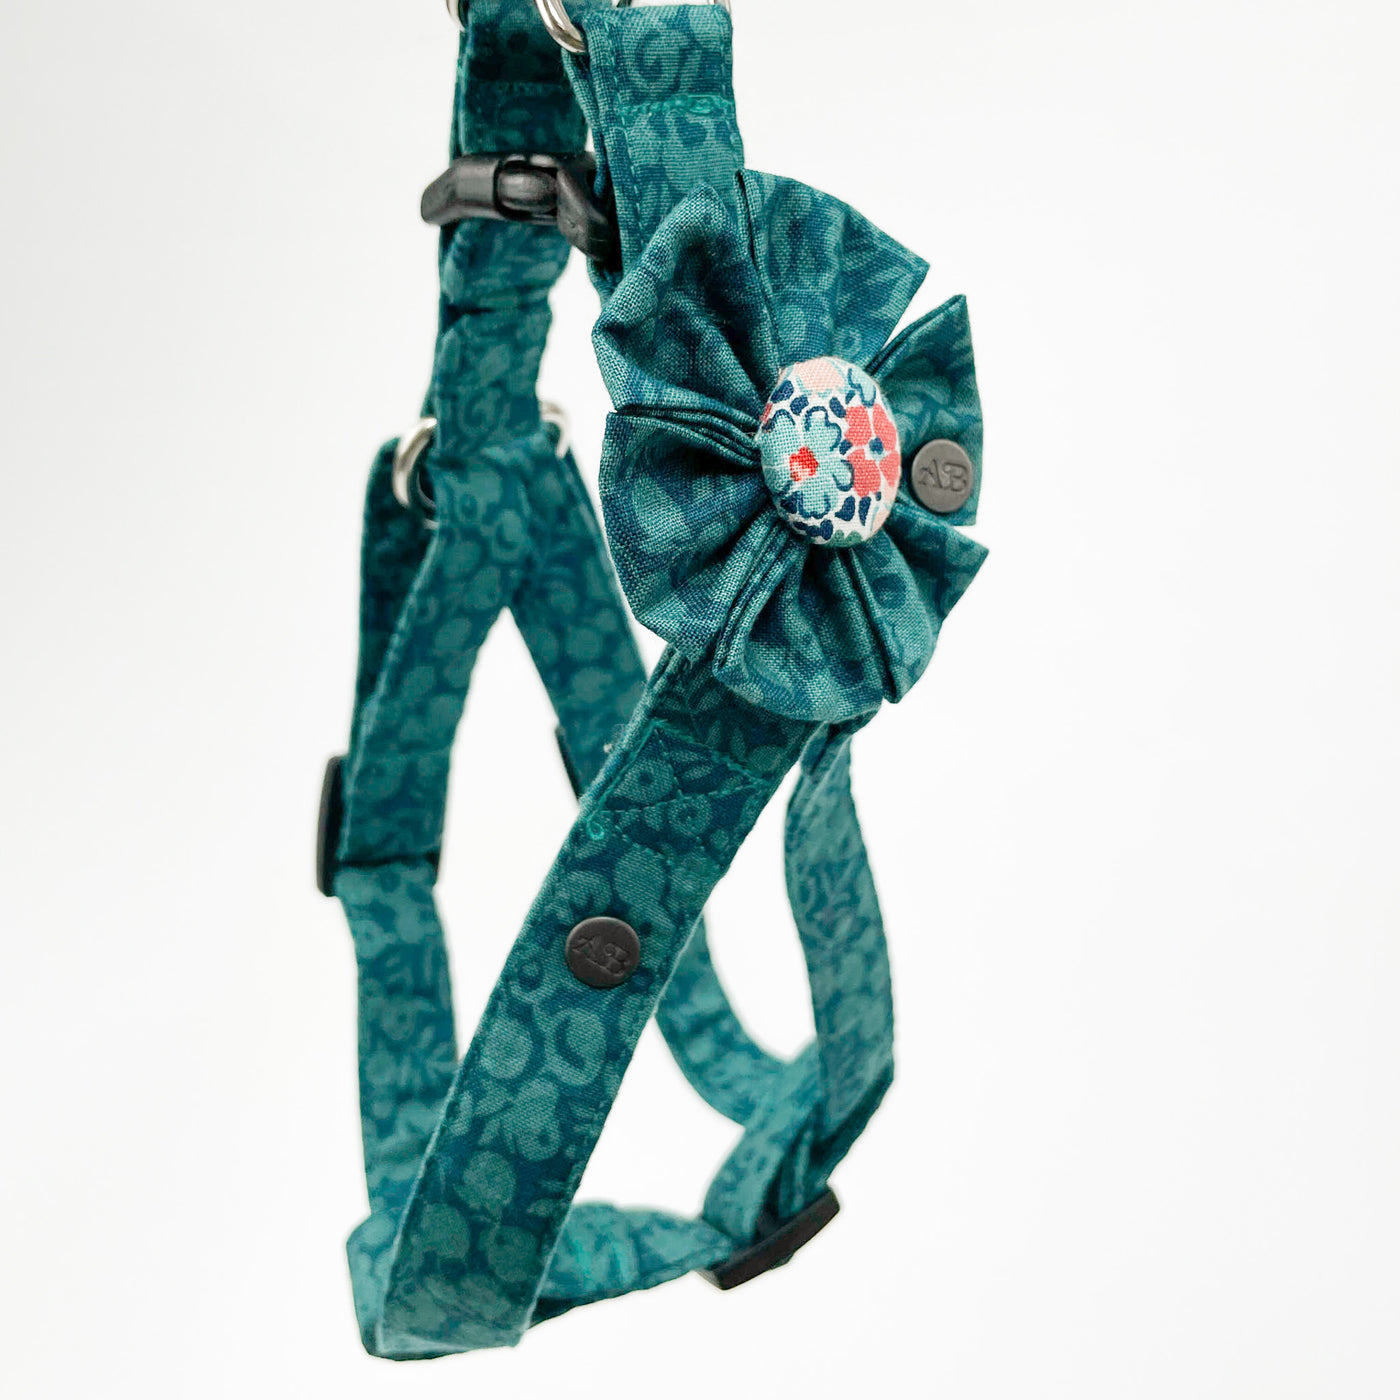 Liberty autumn emerald step in harness with flower